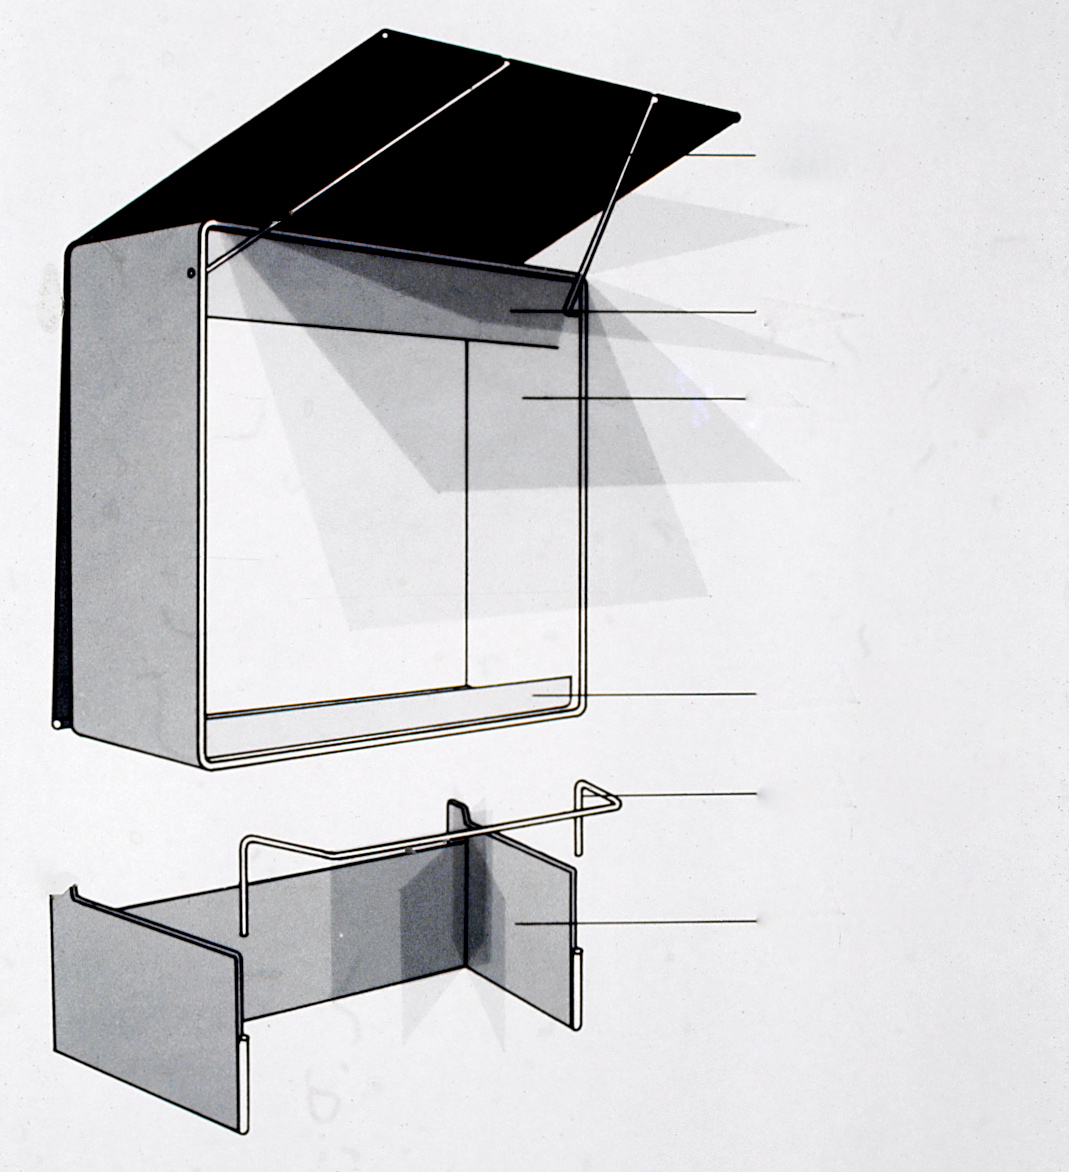 Design concept drawing for exhibit display cases.